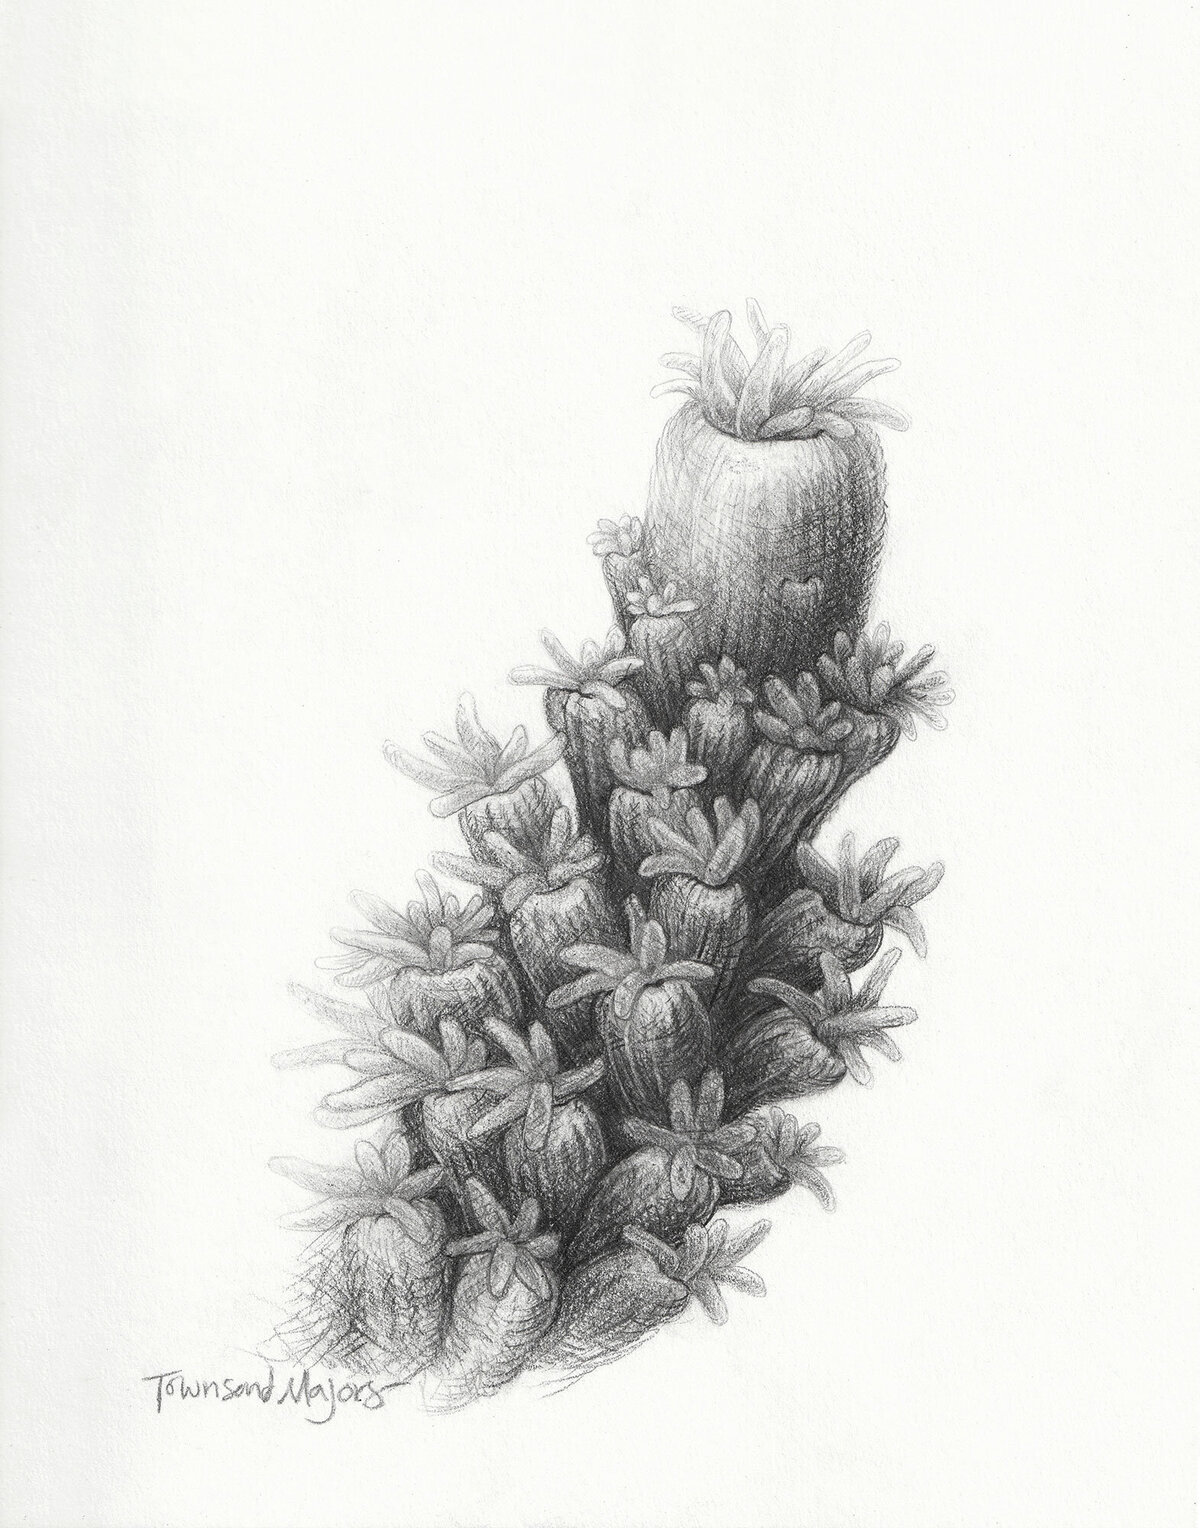 Townsend Majors graphite drawing of coral polyps